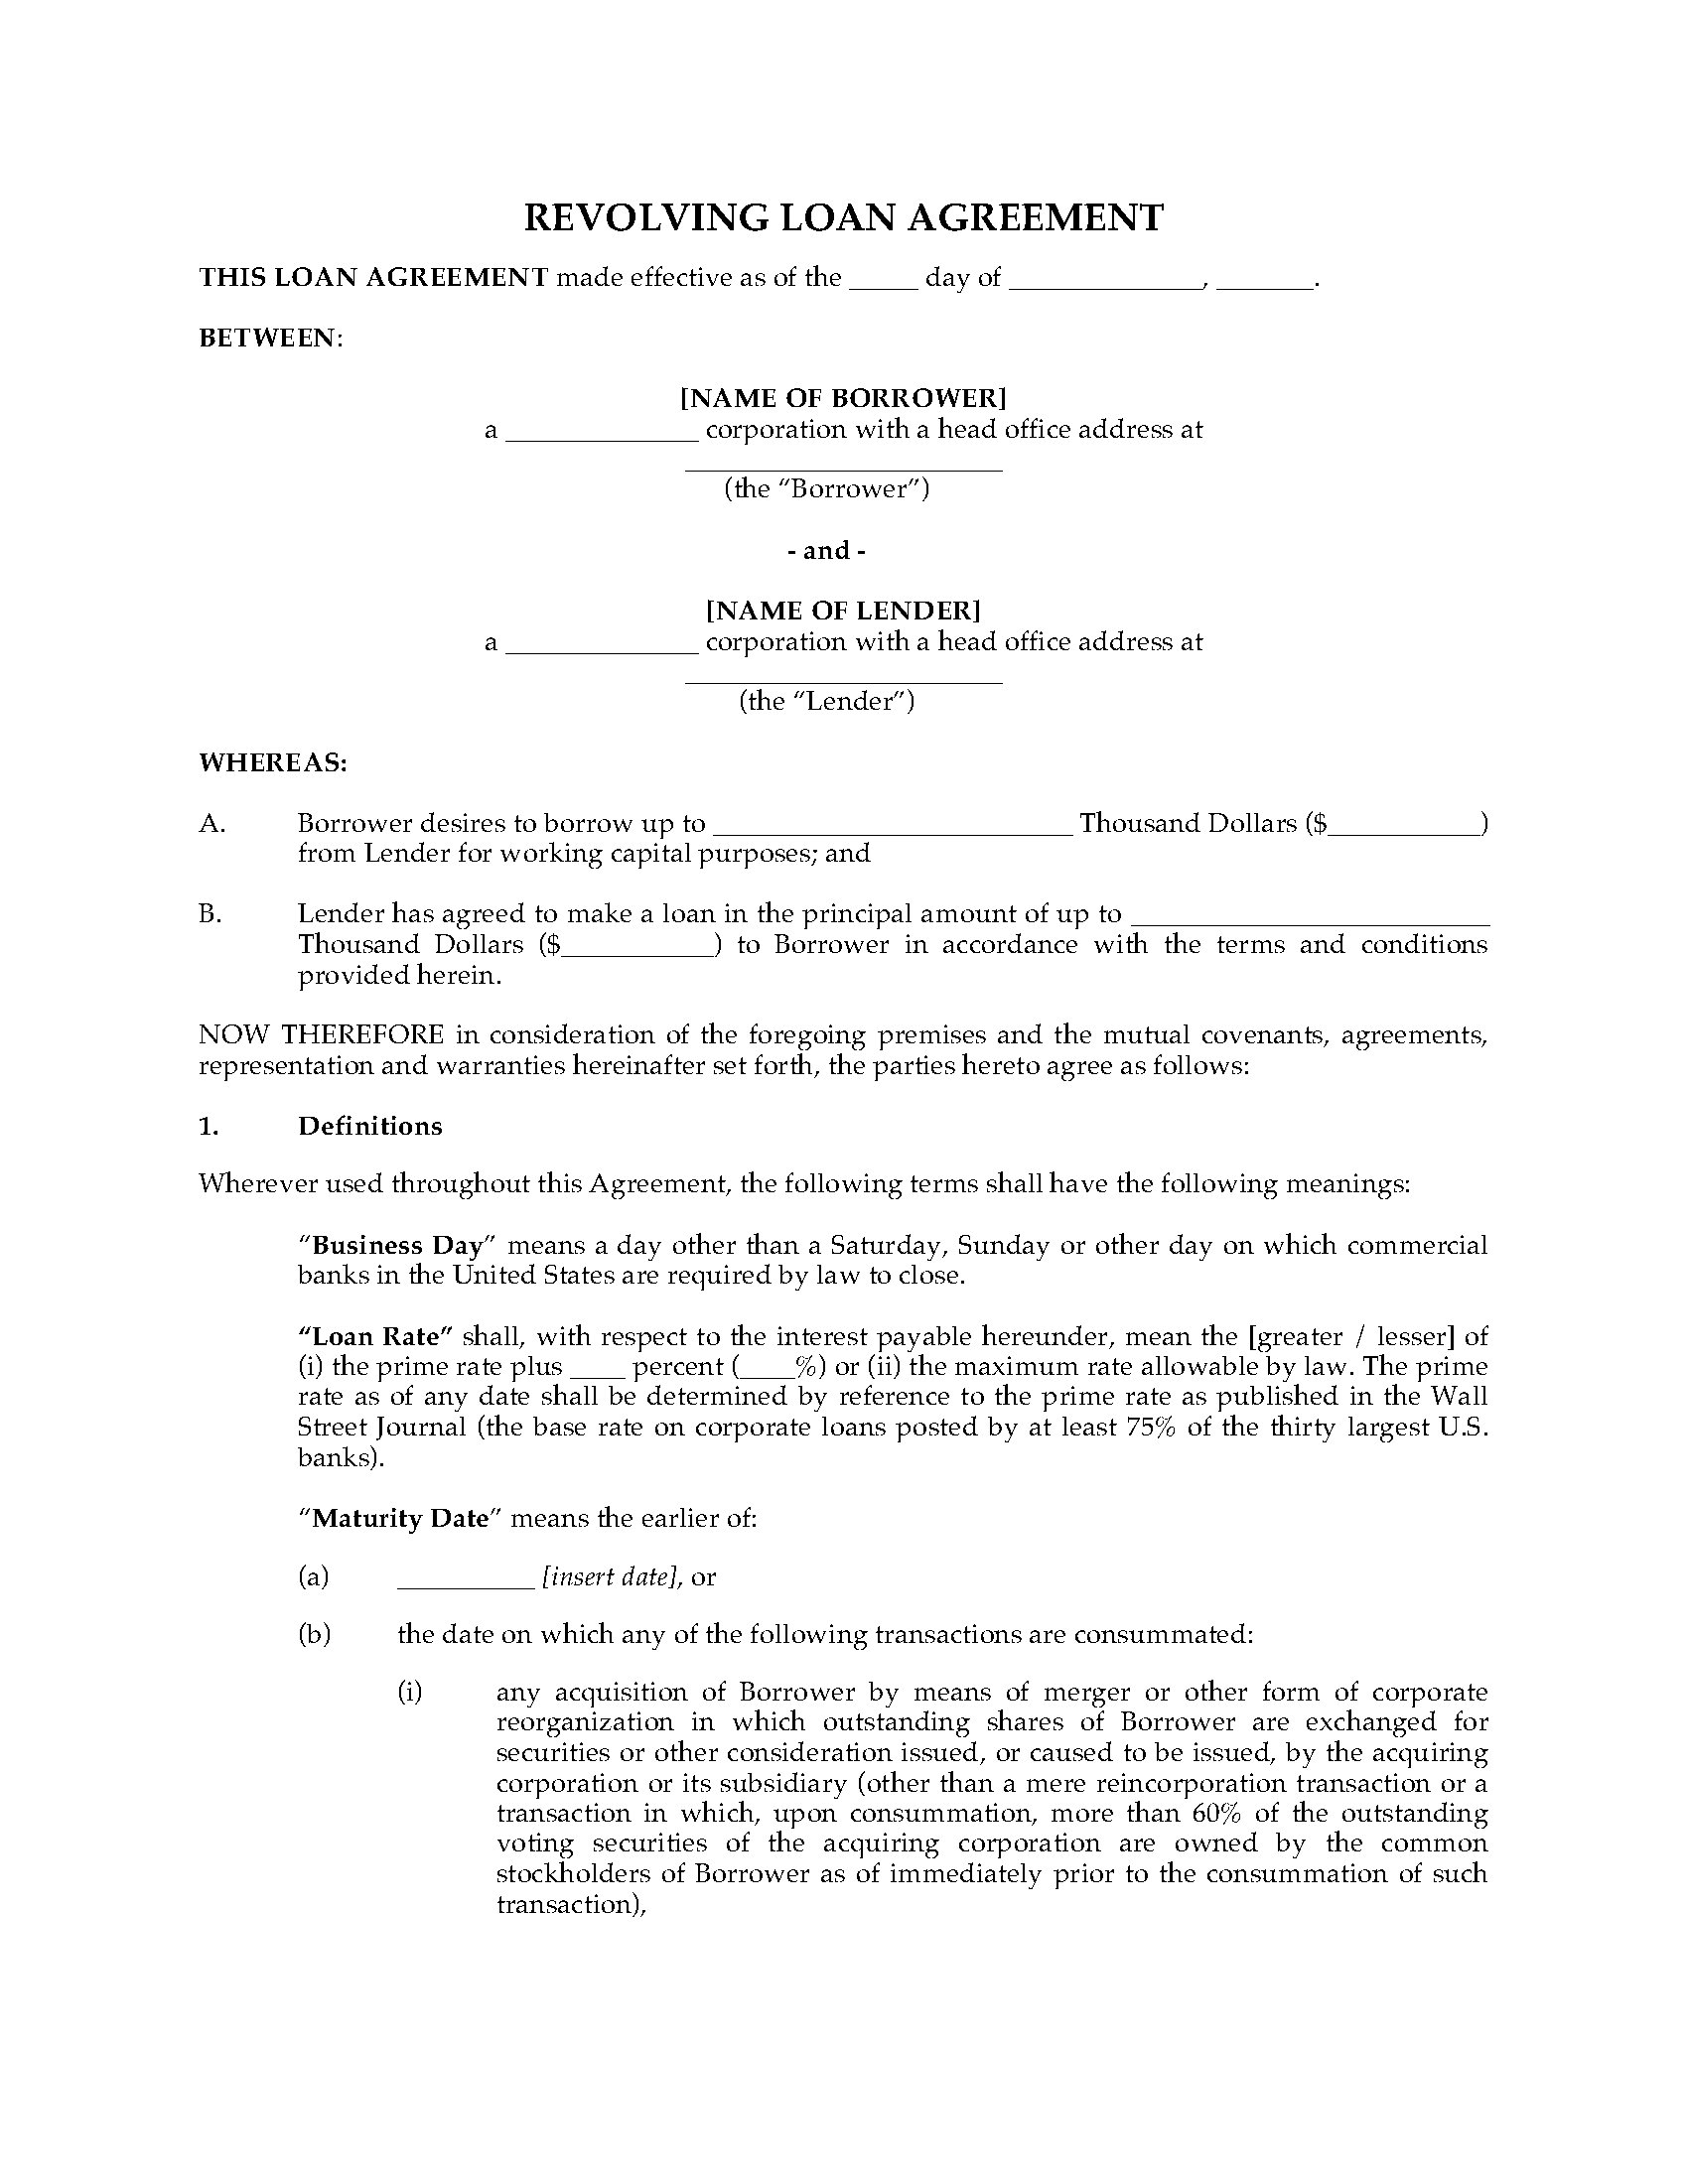 USA Revolving Loan Agreement  Legal Forms and Business Templates Within revolving credit facility agreement template